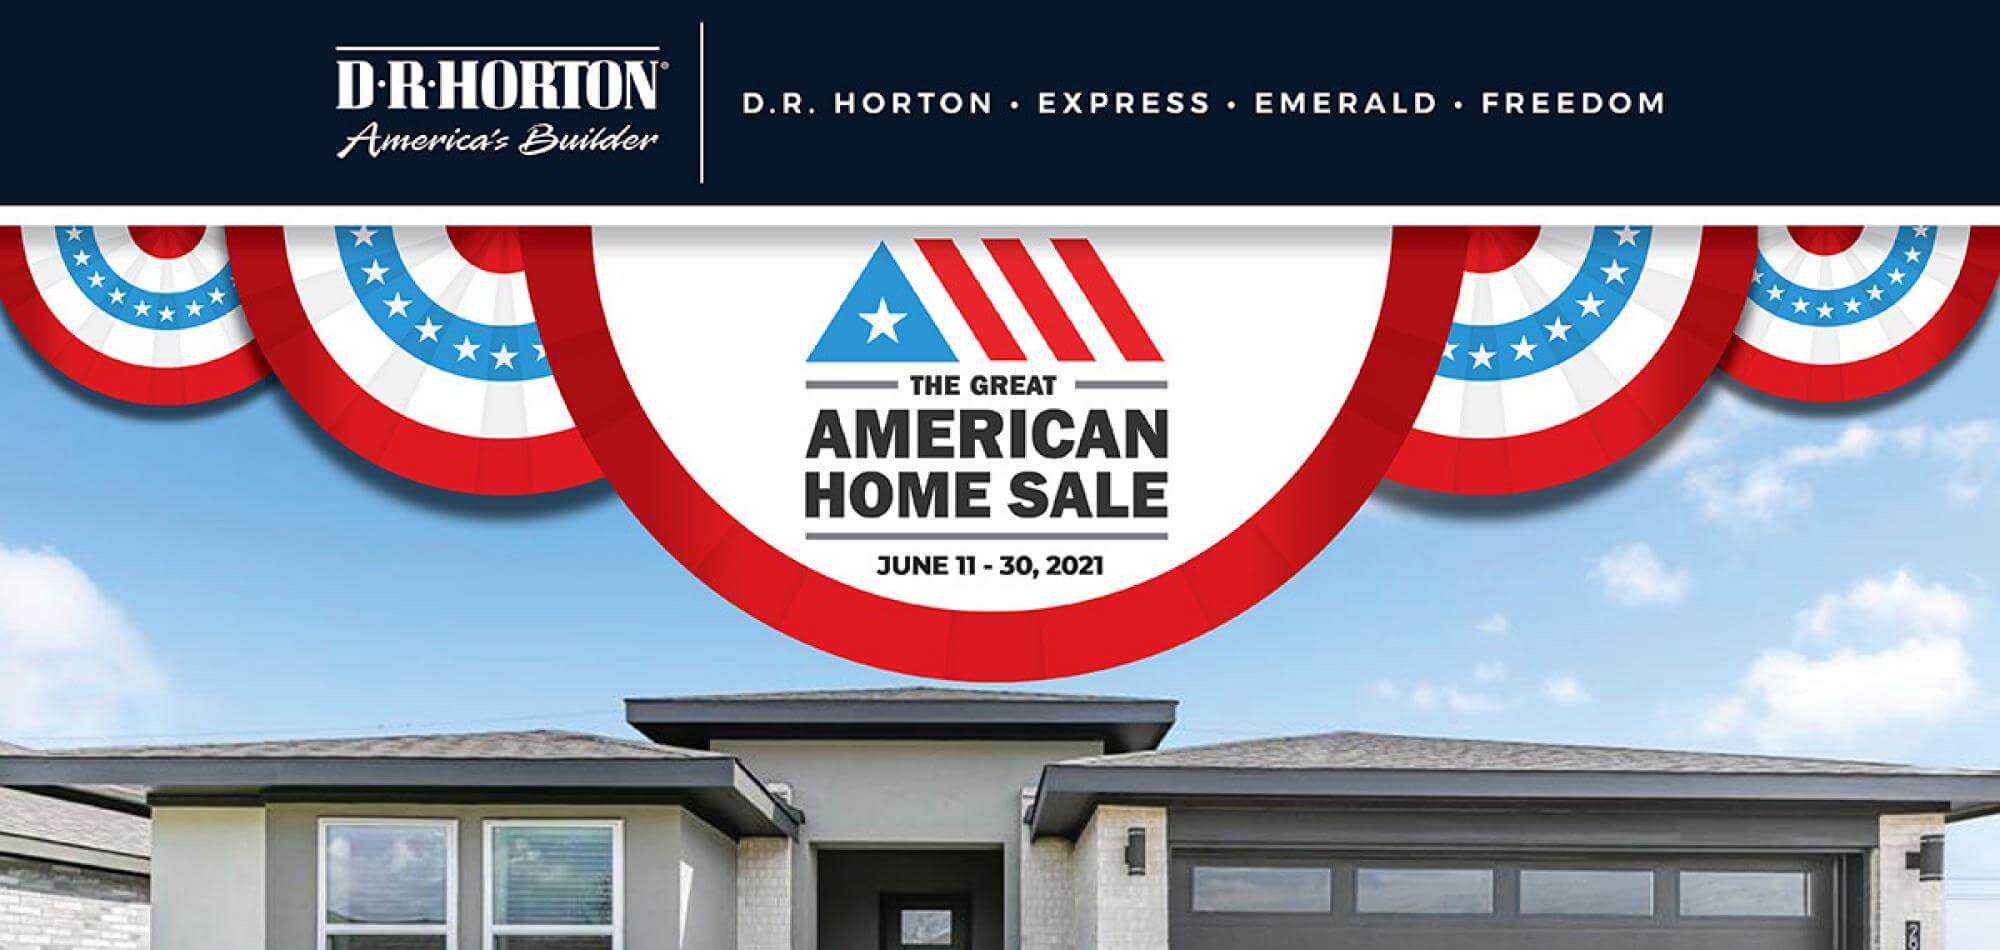 The Great American Home Sale